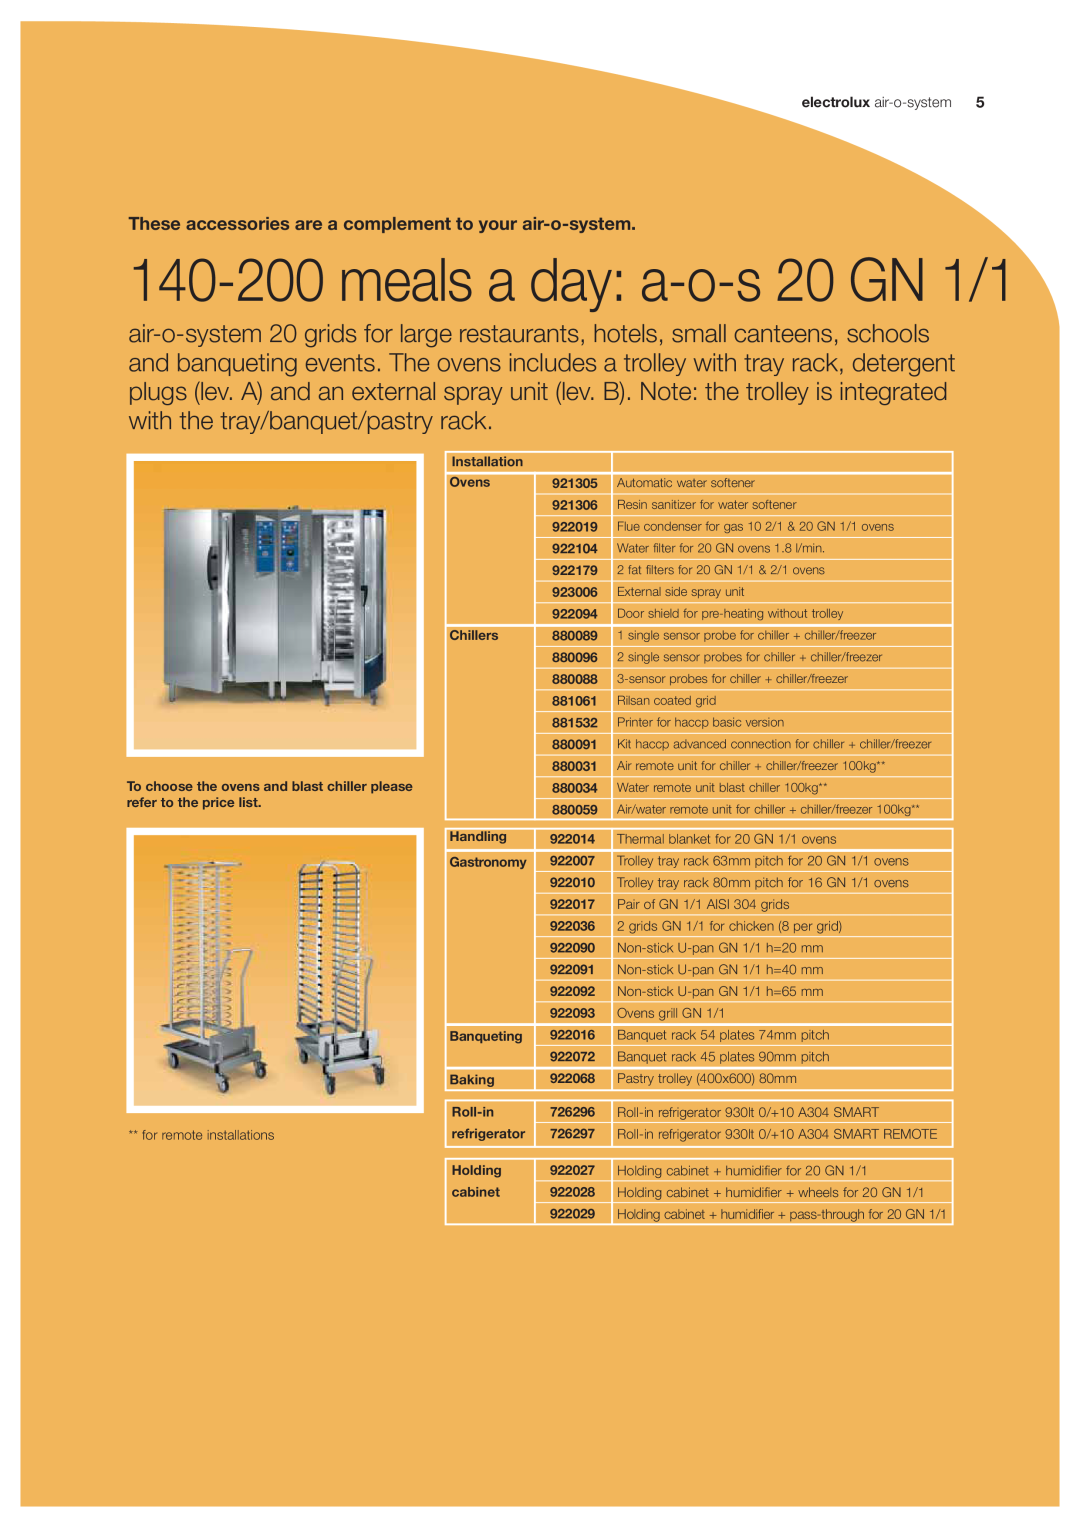 Electrolux 922046, 726496, 691231 manual meals a day a-o-s 20 GN 1/1, These accessories are a complement to your air-o-system 